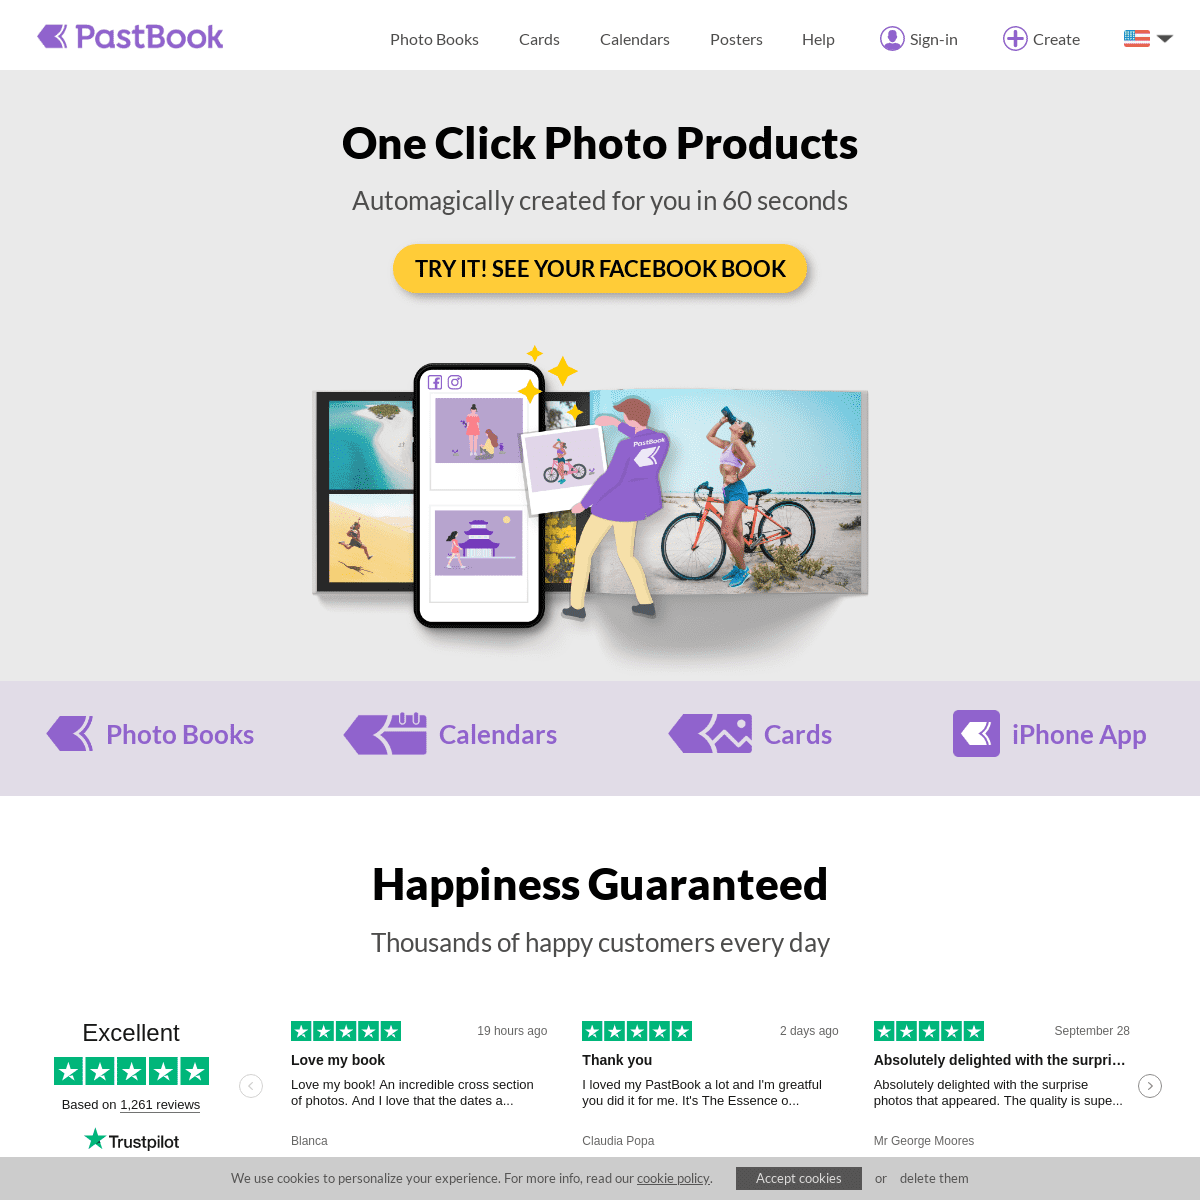 One Click Photo Products | PastBook